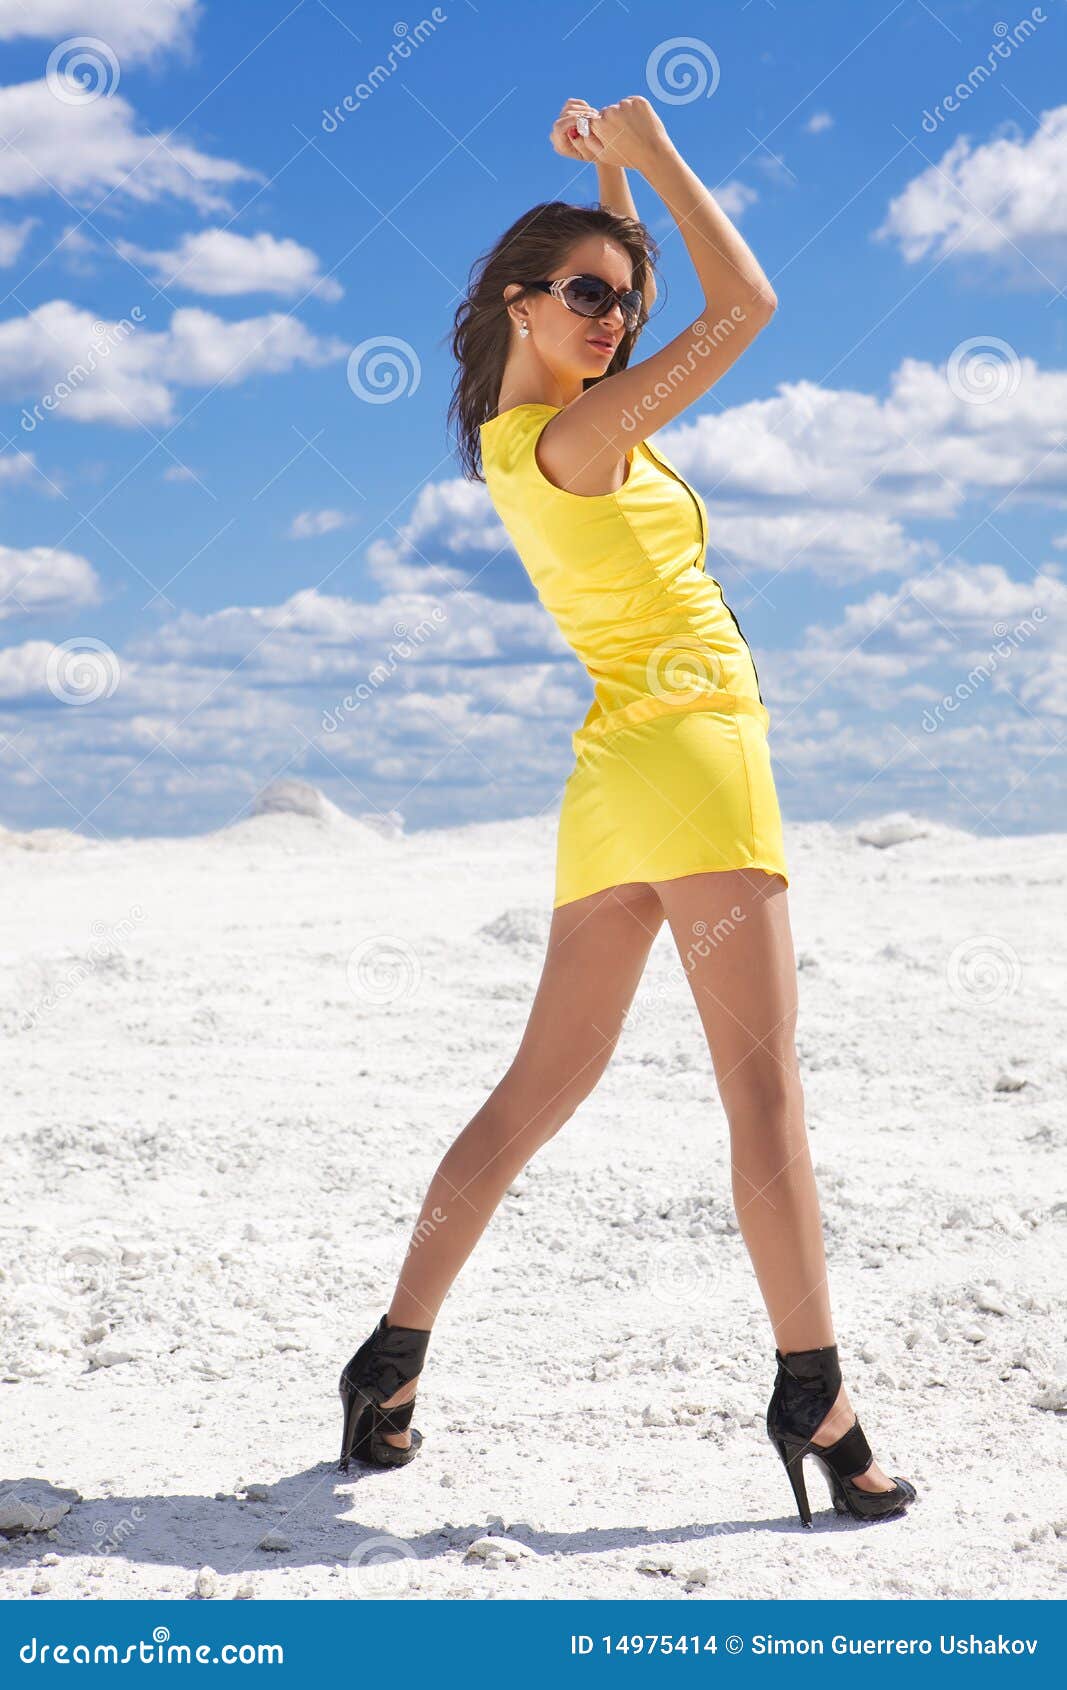 Cute young woman in yellow dress on the snow sexy.